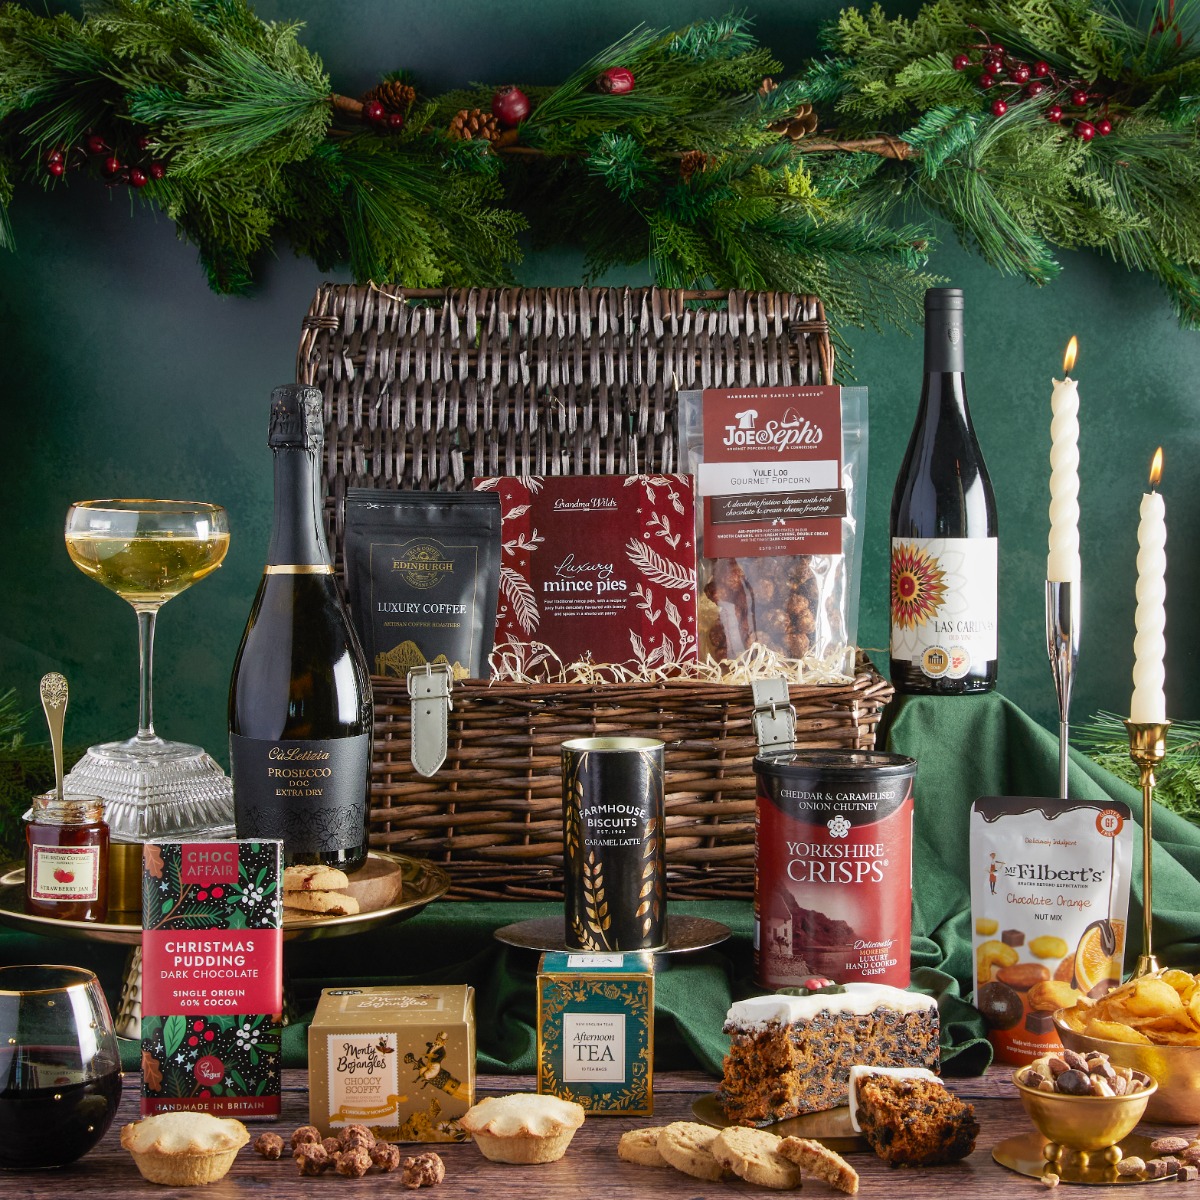  Luxury Bearing Gifts Christmas Hamper with contents on display